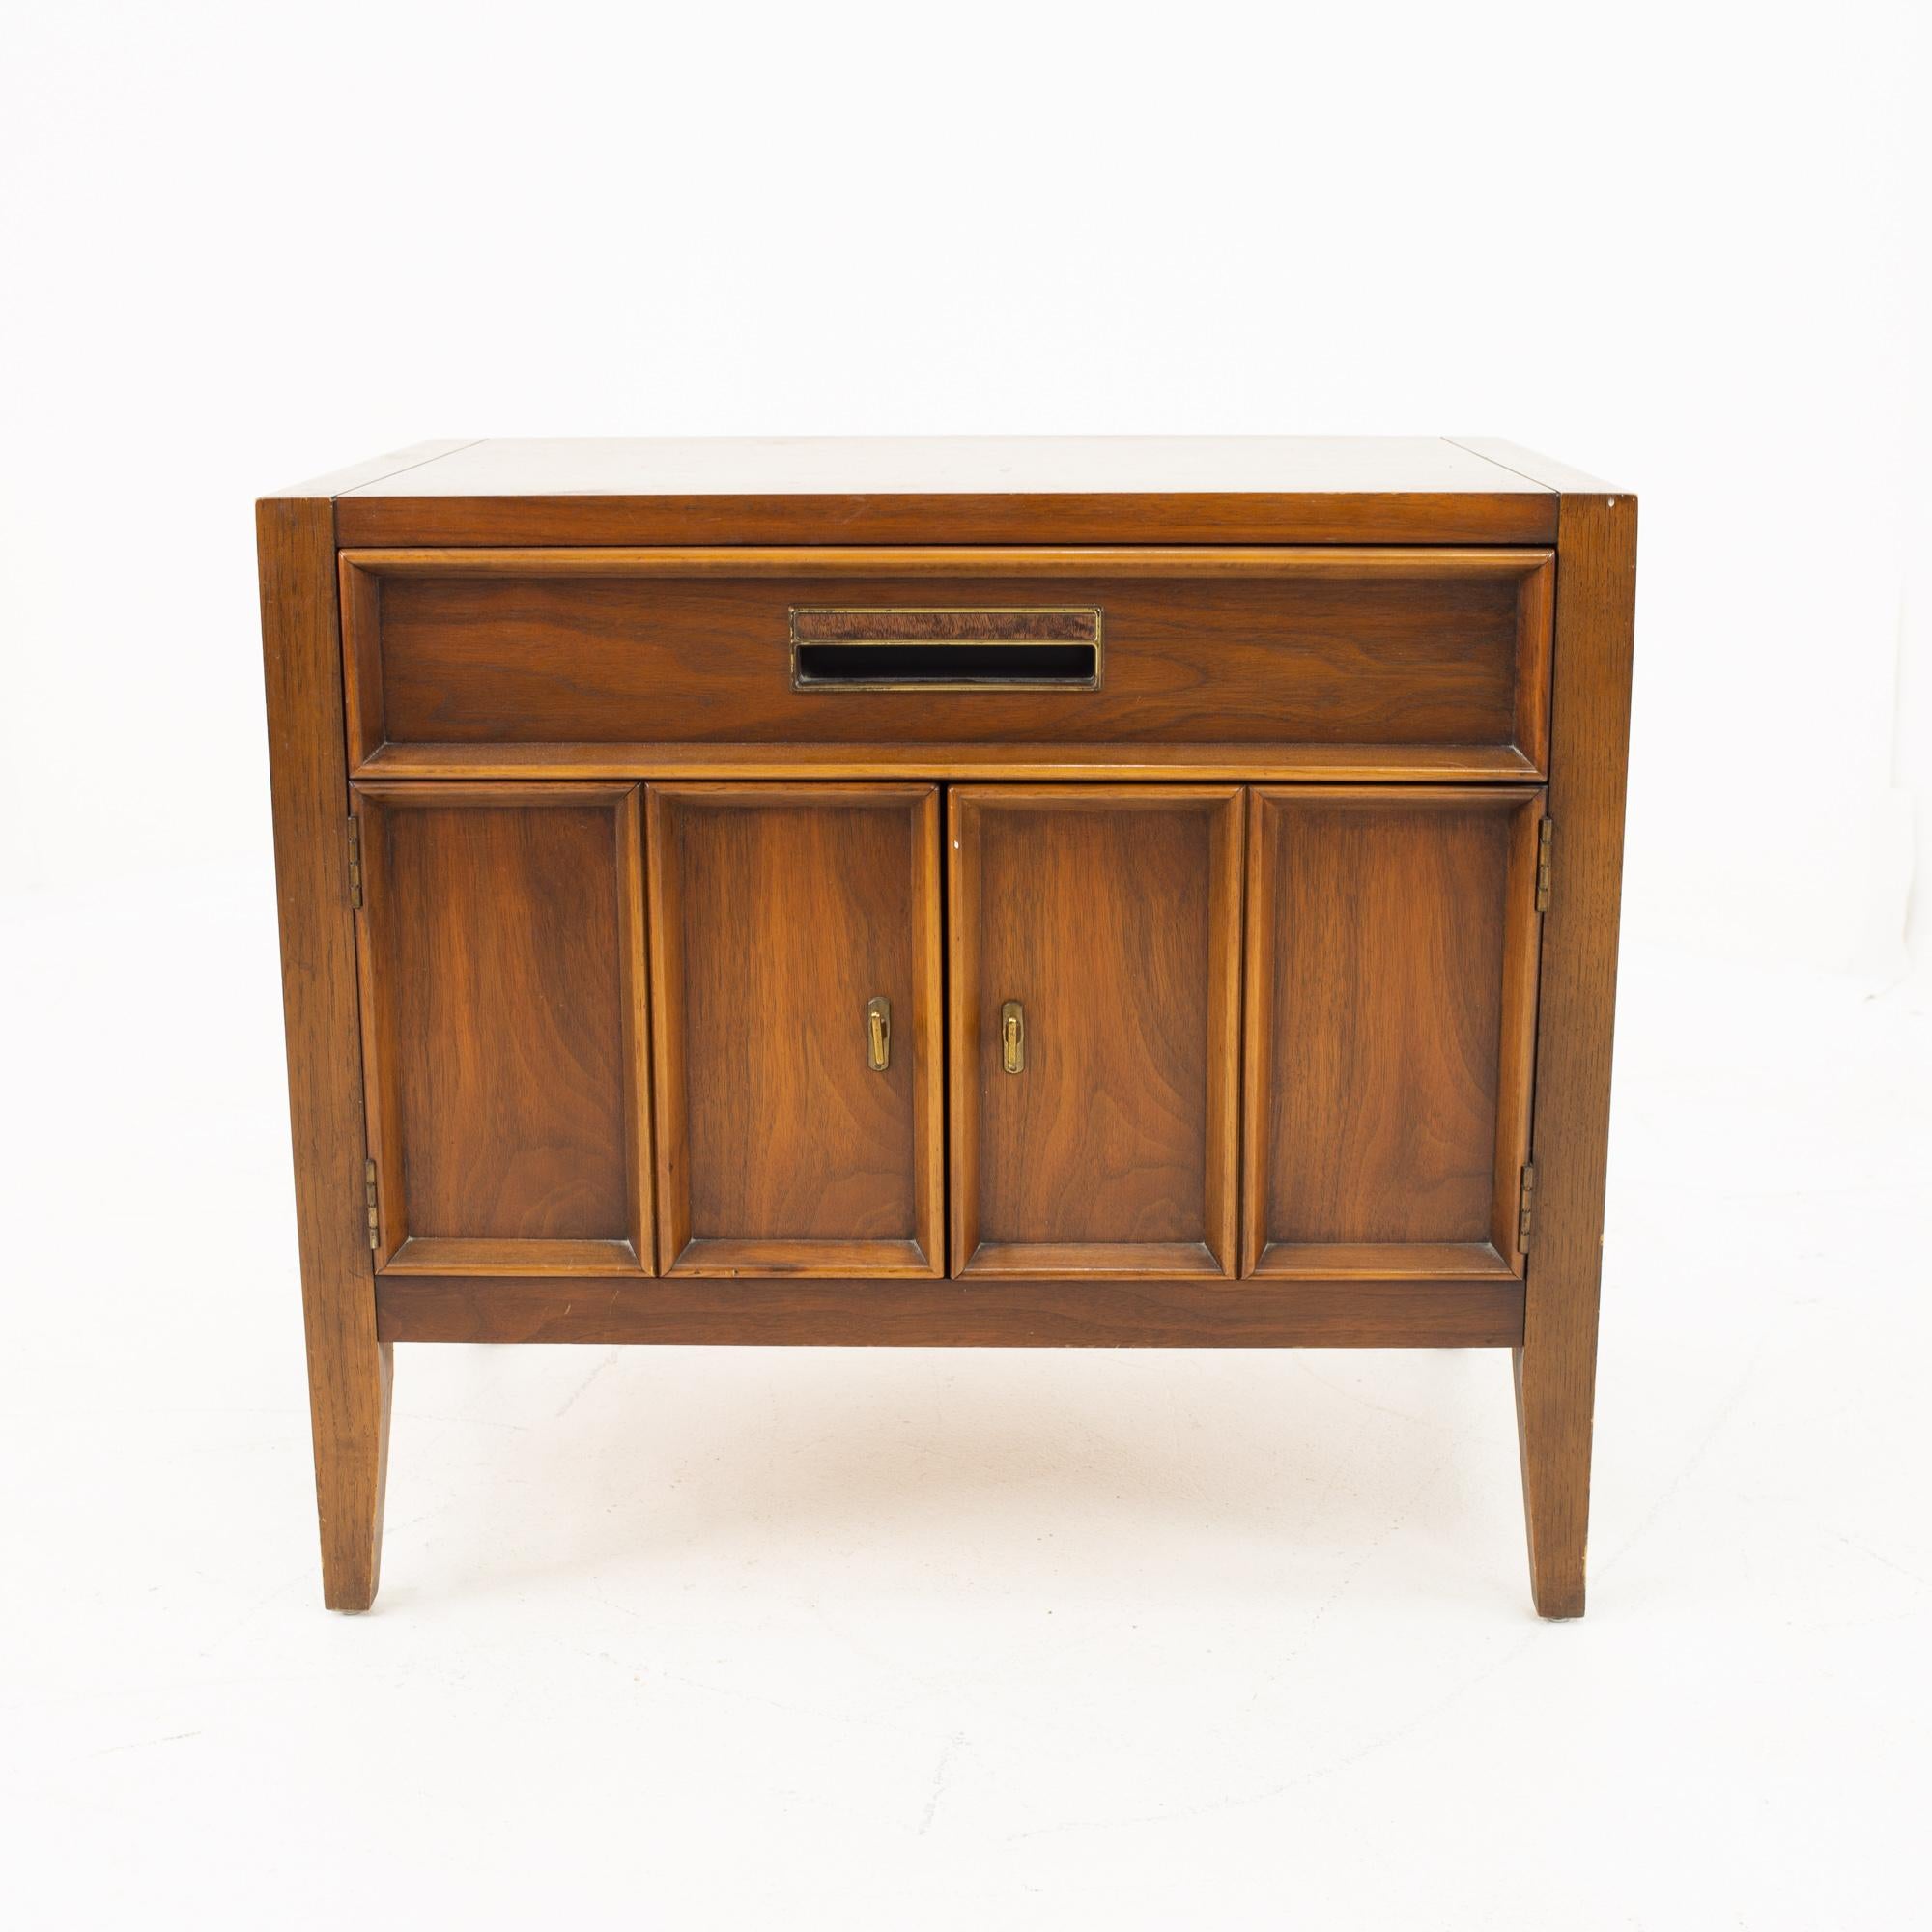 Drexel Mid Century walnut nightstand
Nightstand measures: 26 wide x 17 deep x 23 high

This price includes getting this piece in what we call restored vintage condition. That means the piece is permanently fixed upon purchase so it’s free of